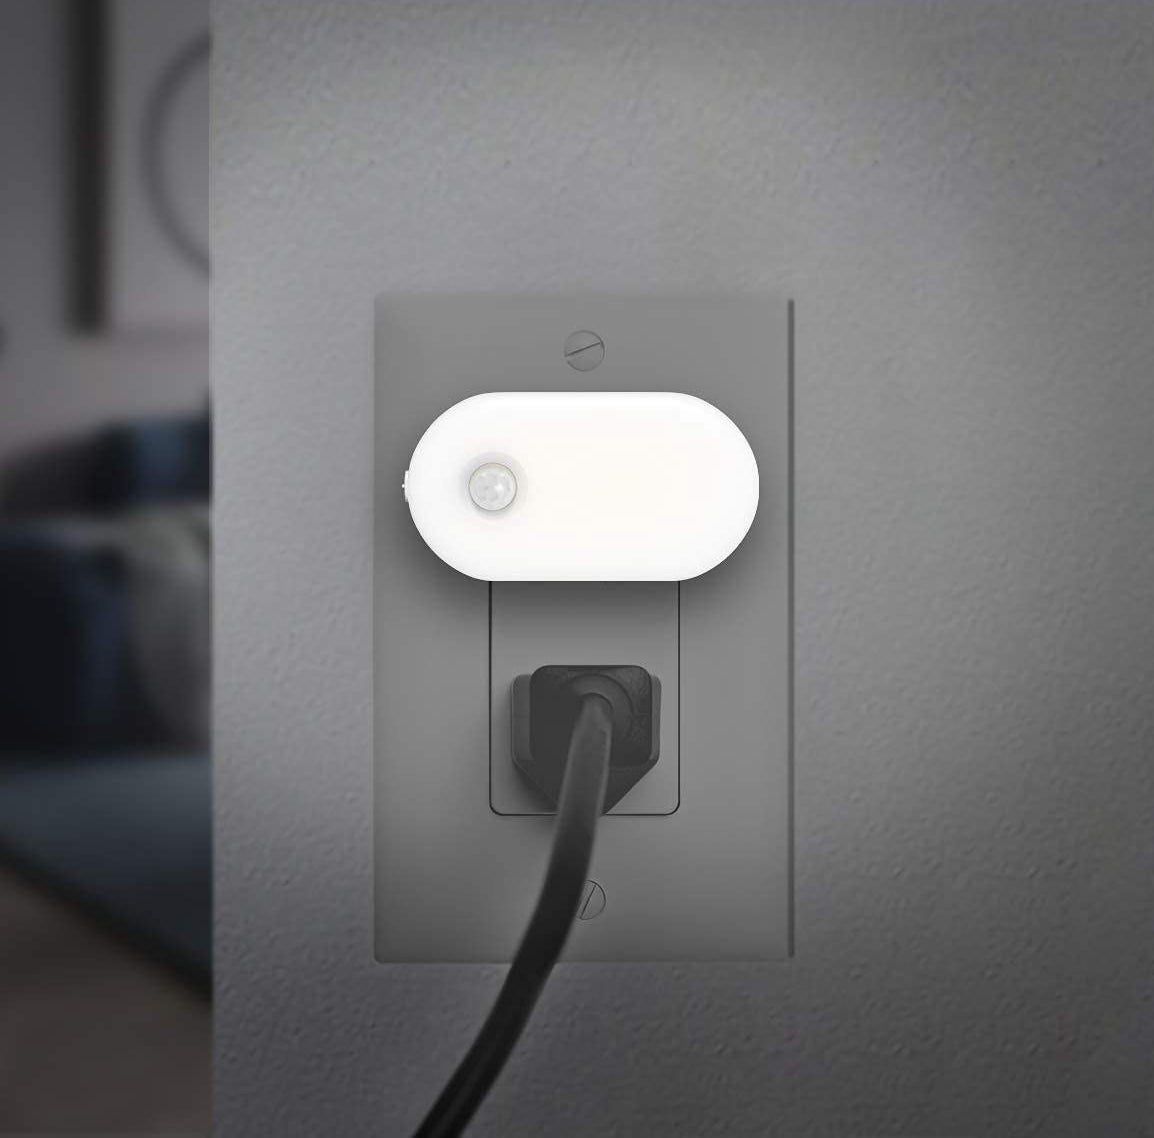 one of the nightlight plugged into an outlet